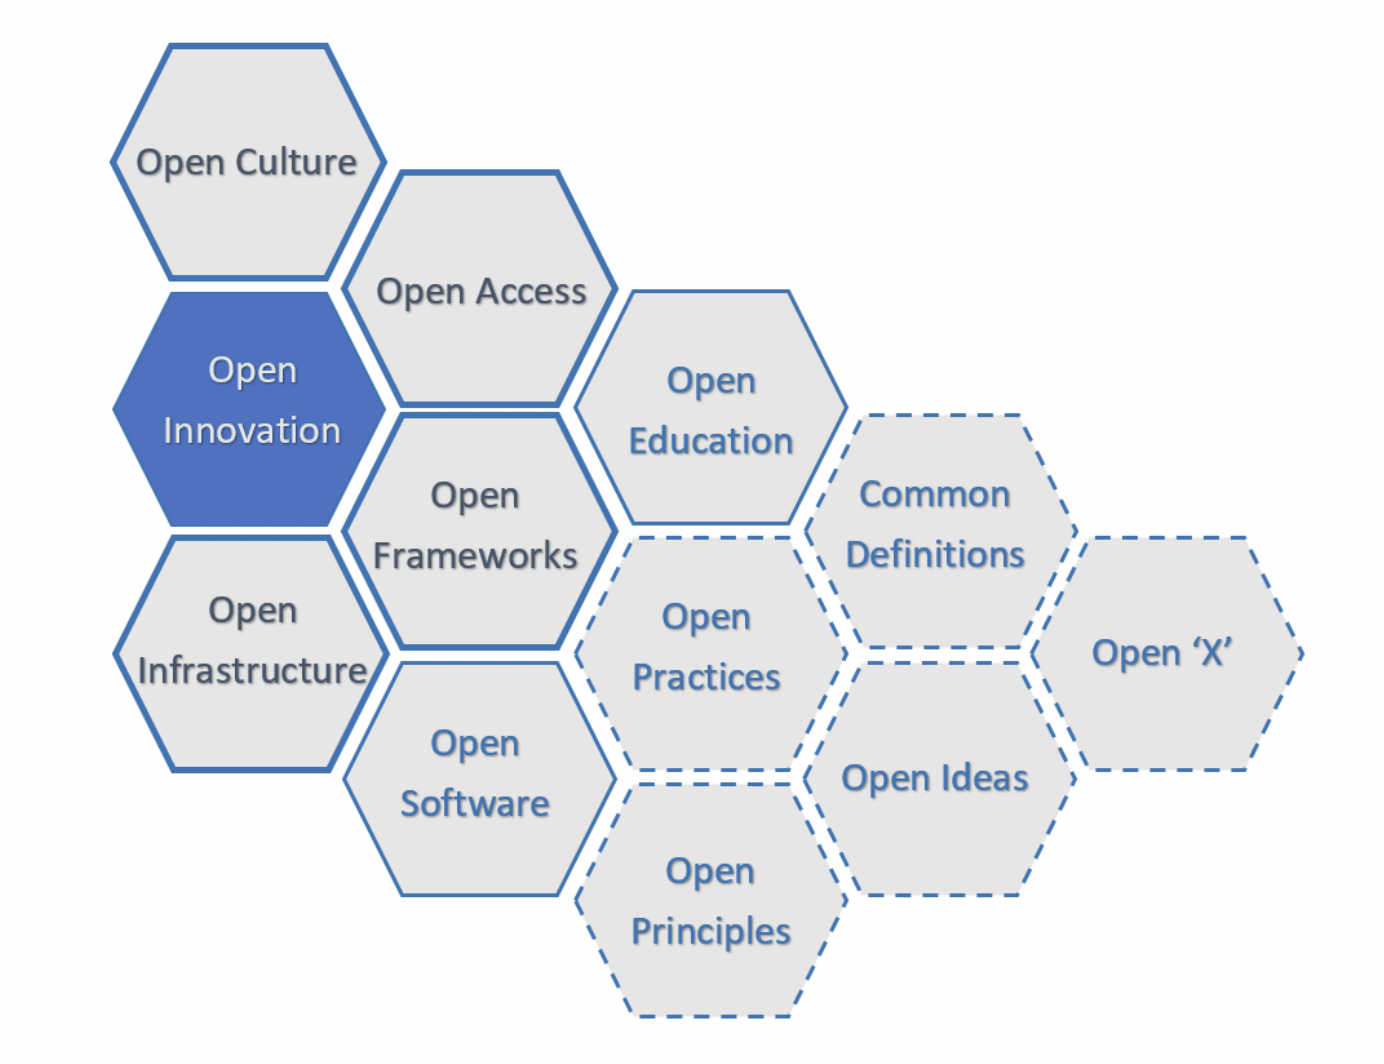 ICDE Open Innovation Framework & Ecosystem ‘Clusters’